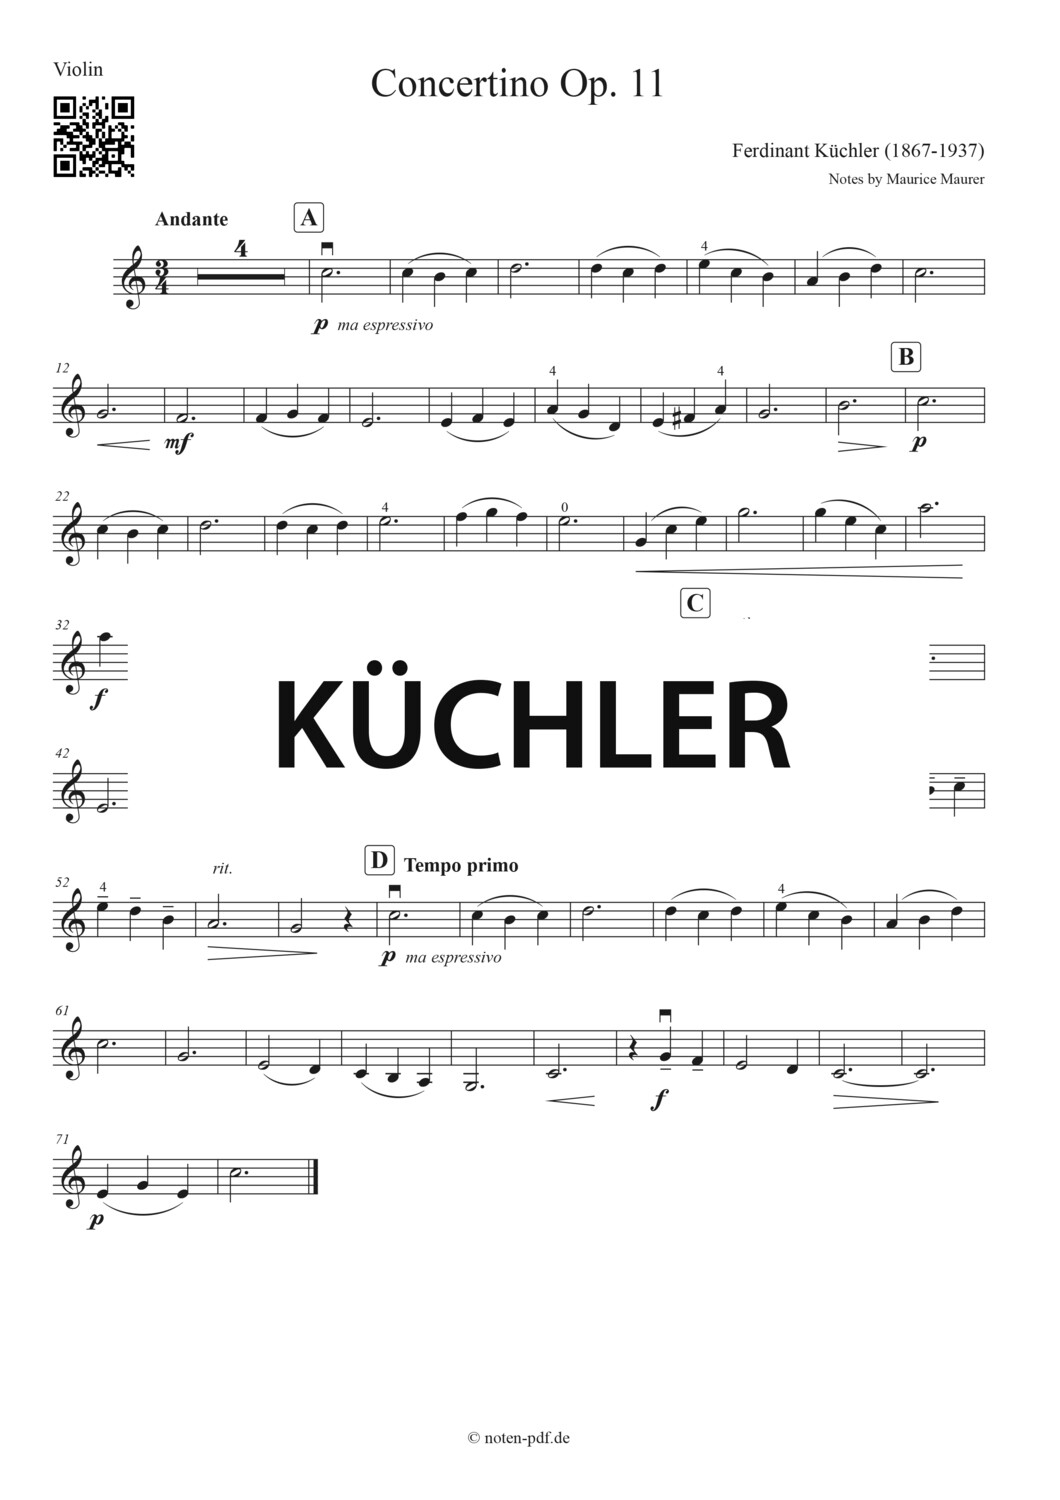 Küchler: Concertino Op. 11 - 2. Movement